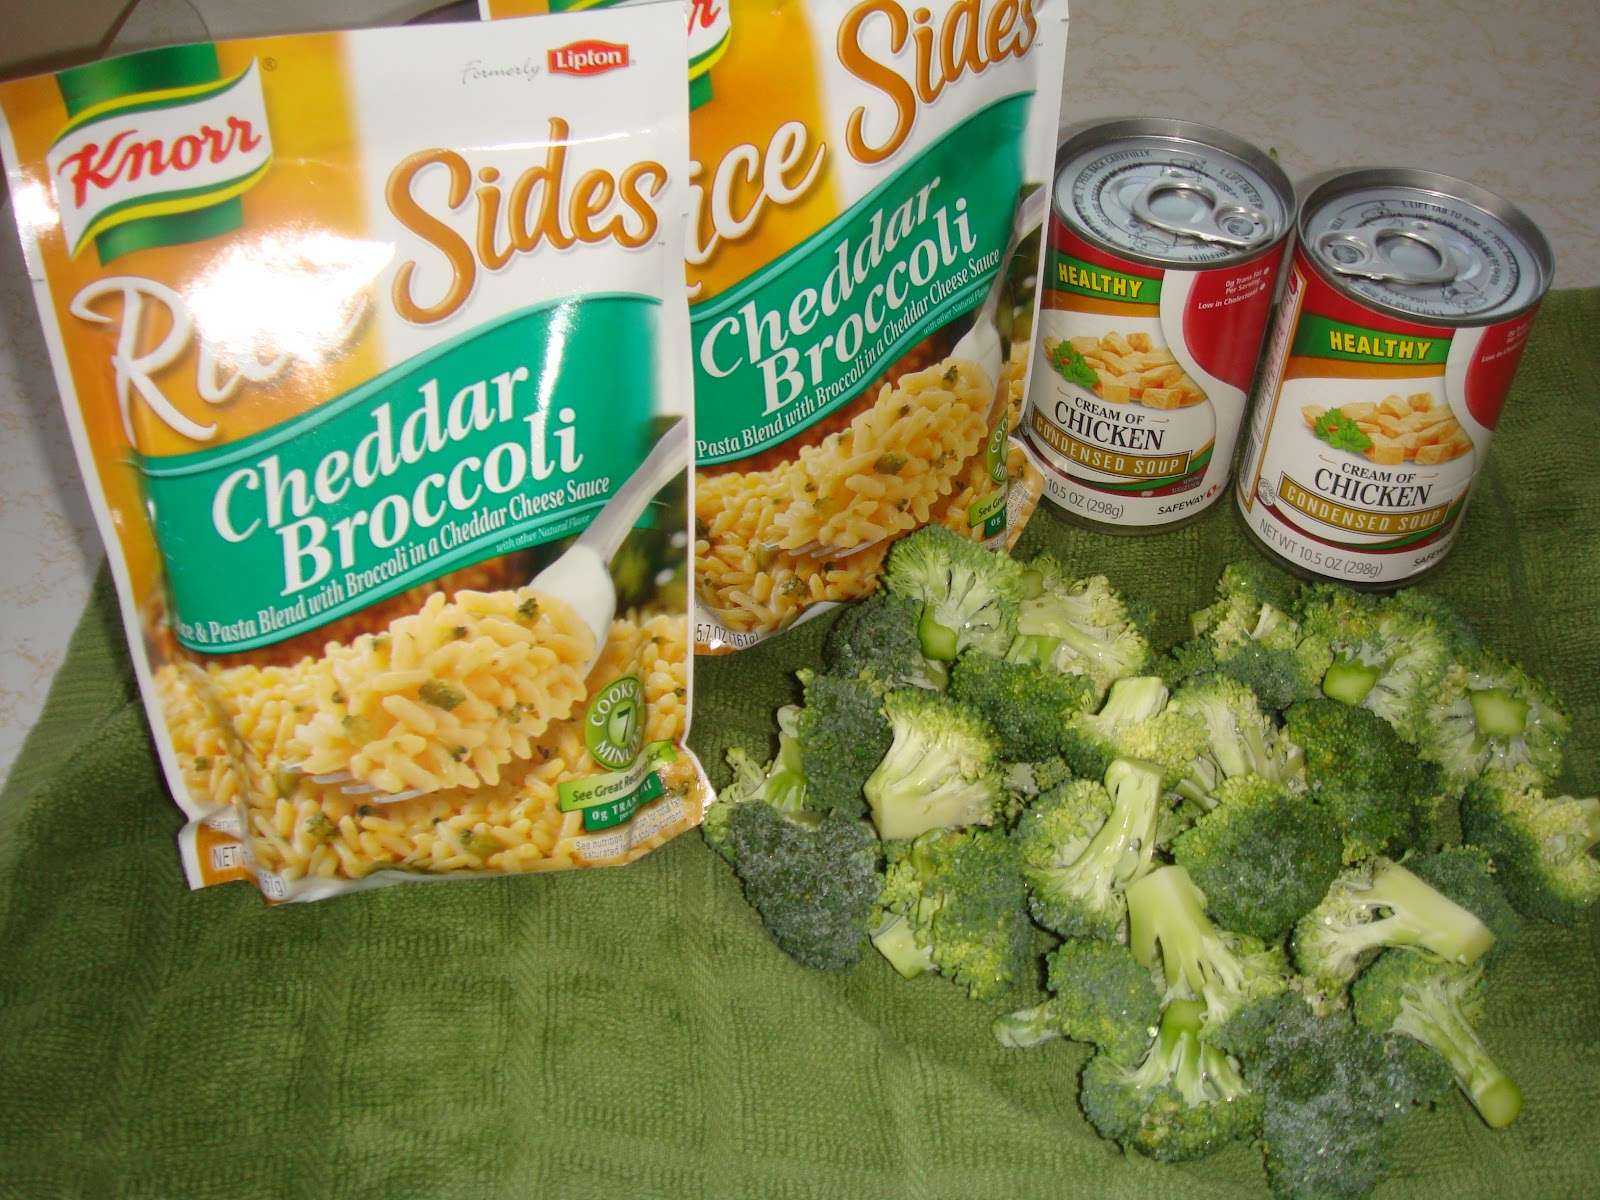 Four Sisters Cooking: Chicken Broccoli Rice Bake